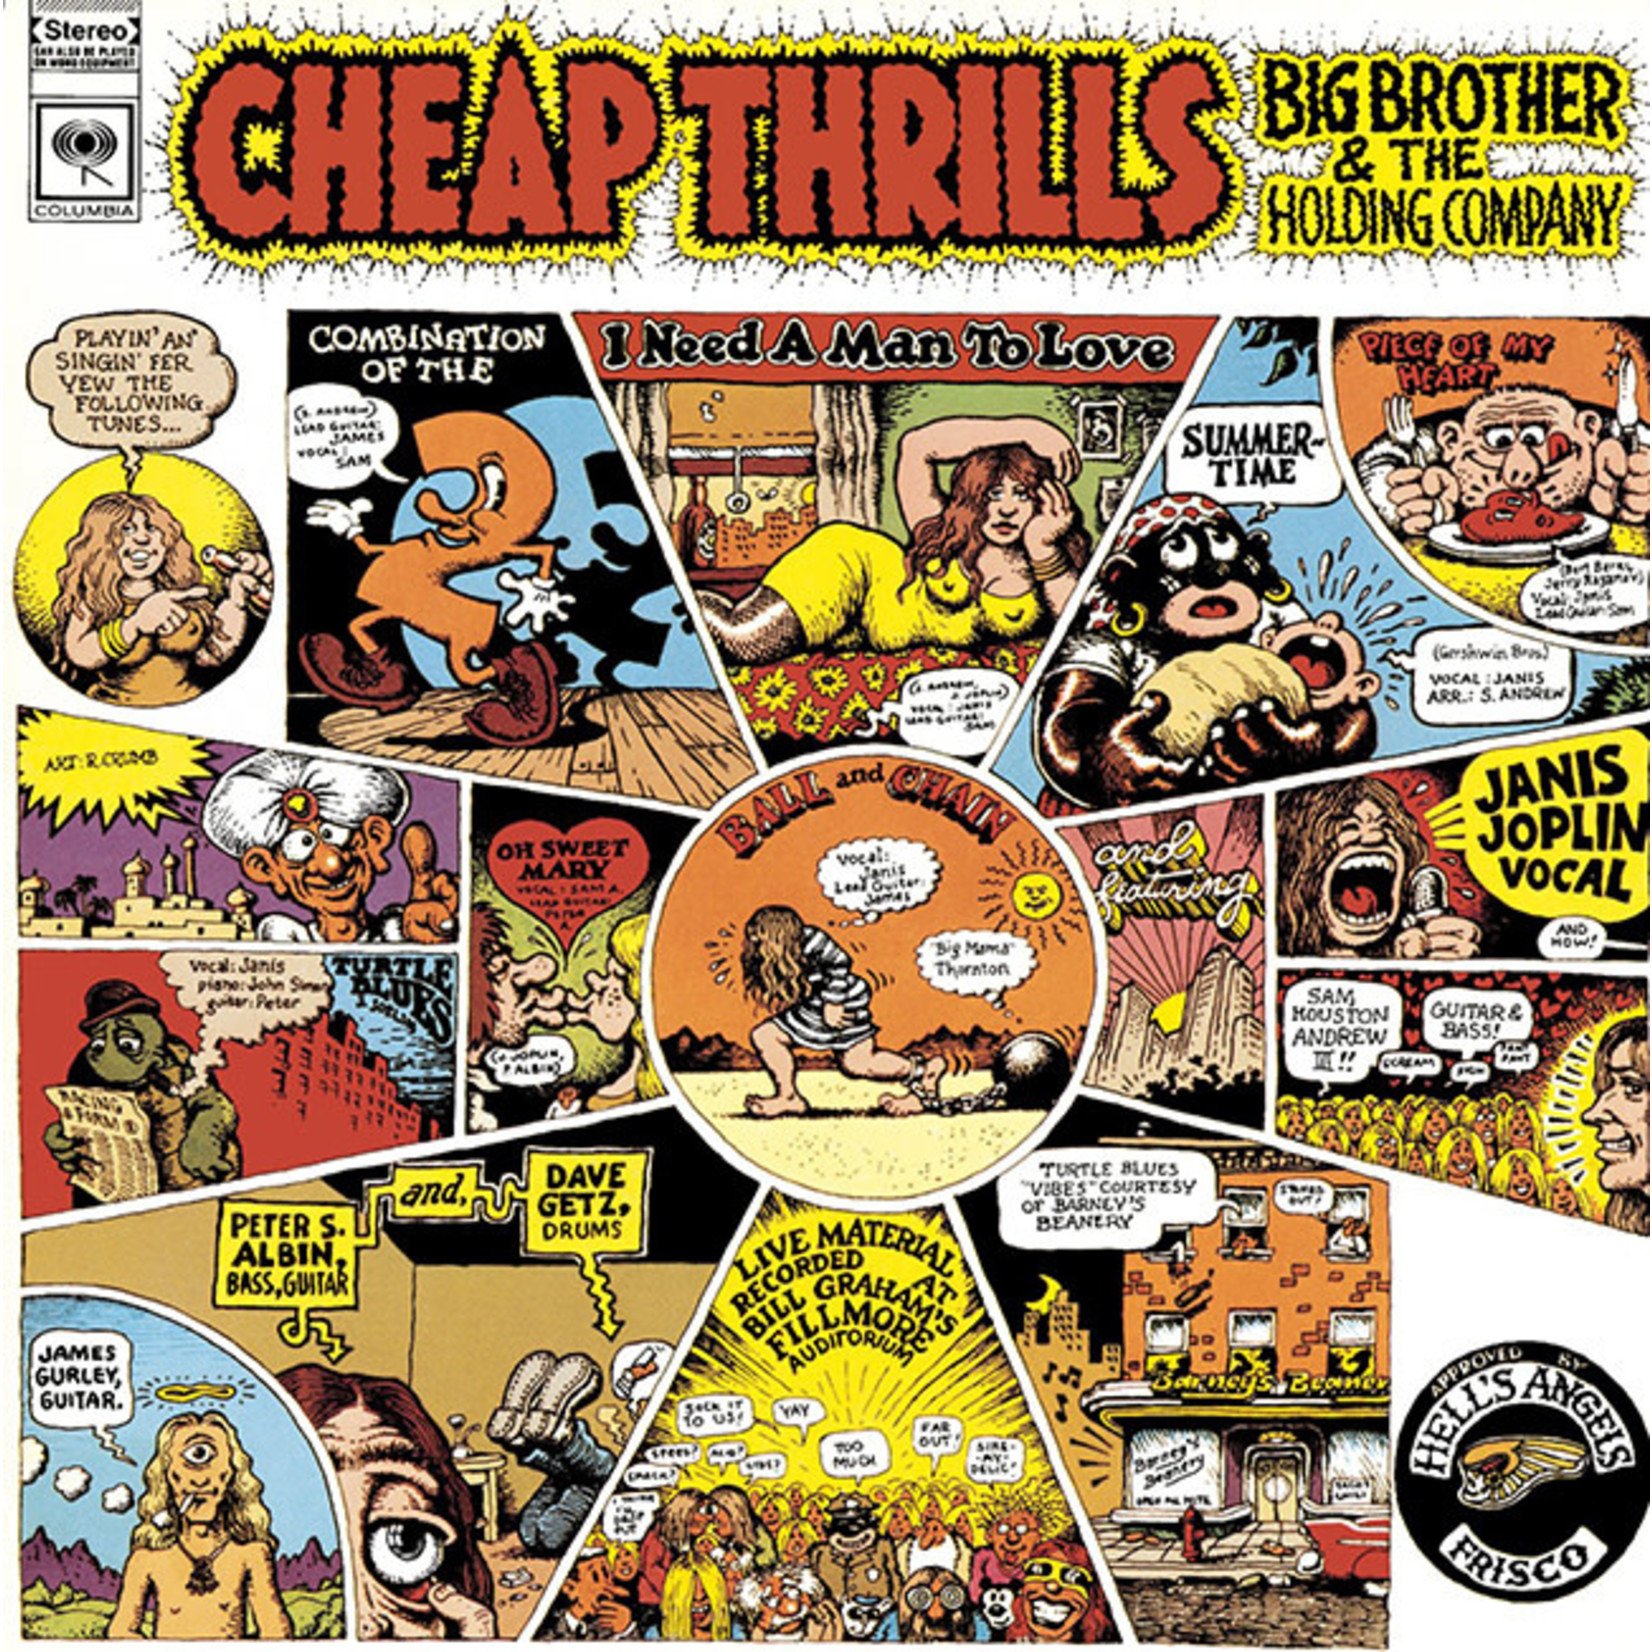 [New] Big Brother & the Holding Co. (Janis Joplin) - Cheap Thrills